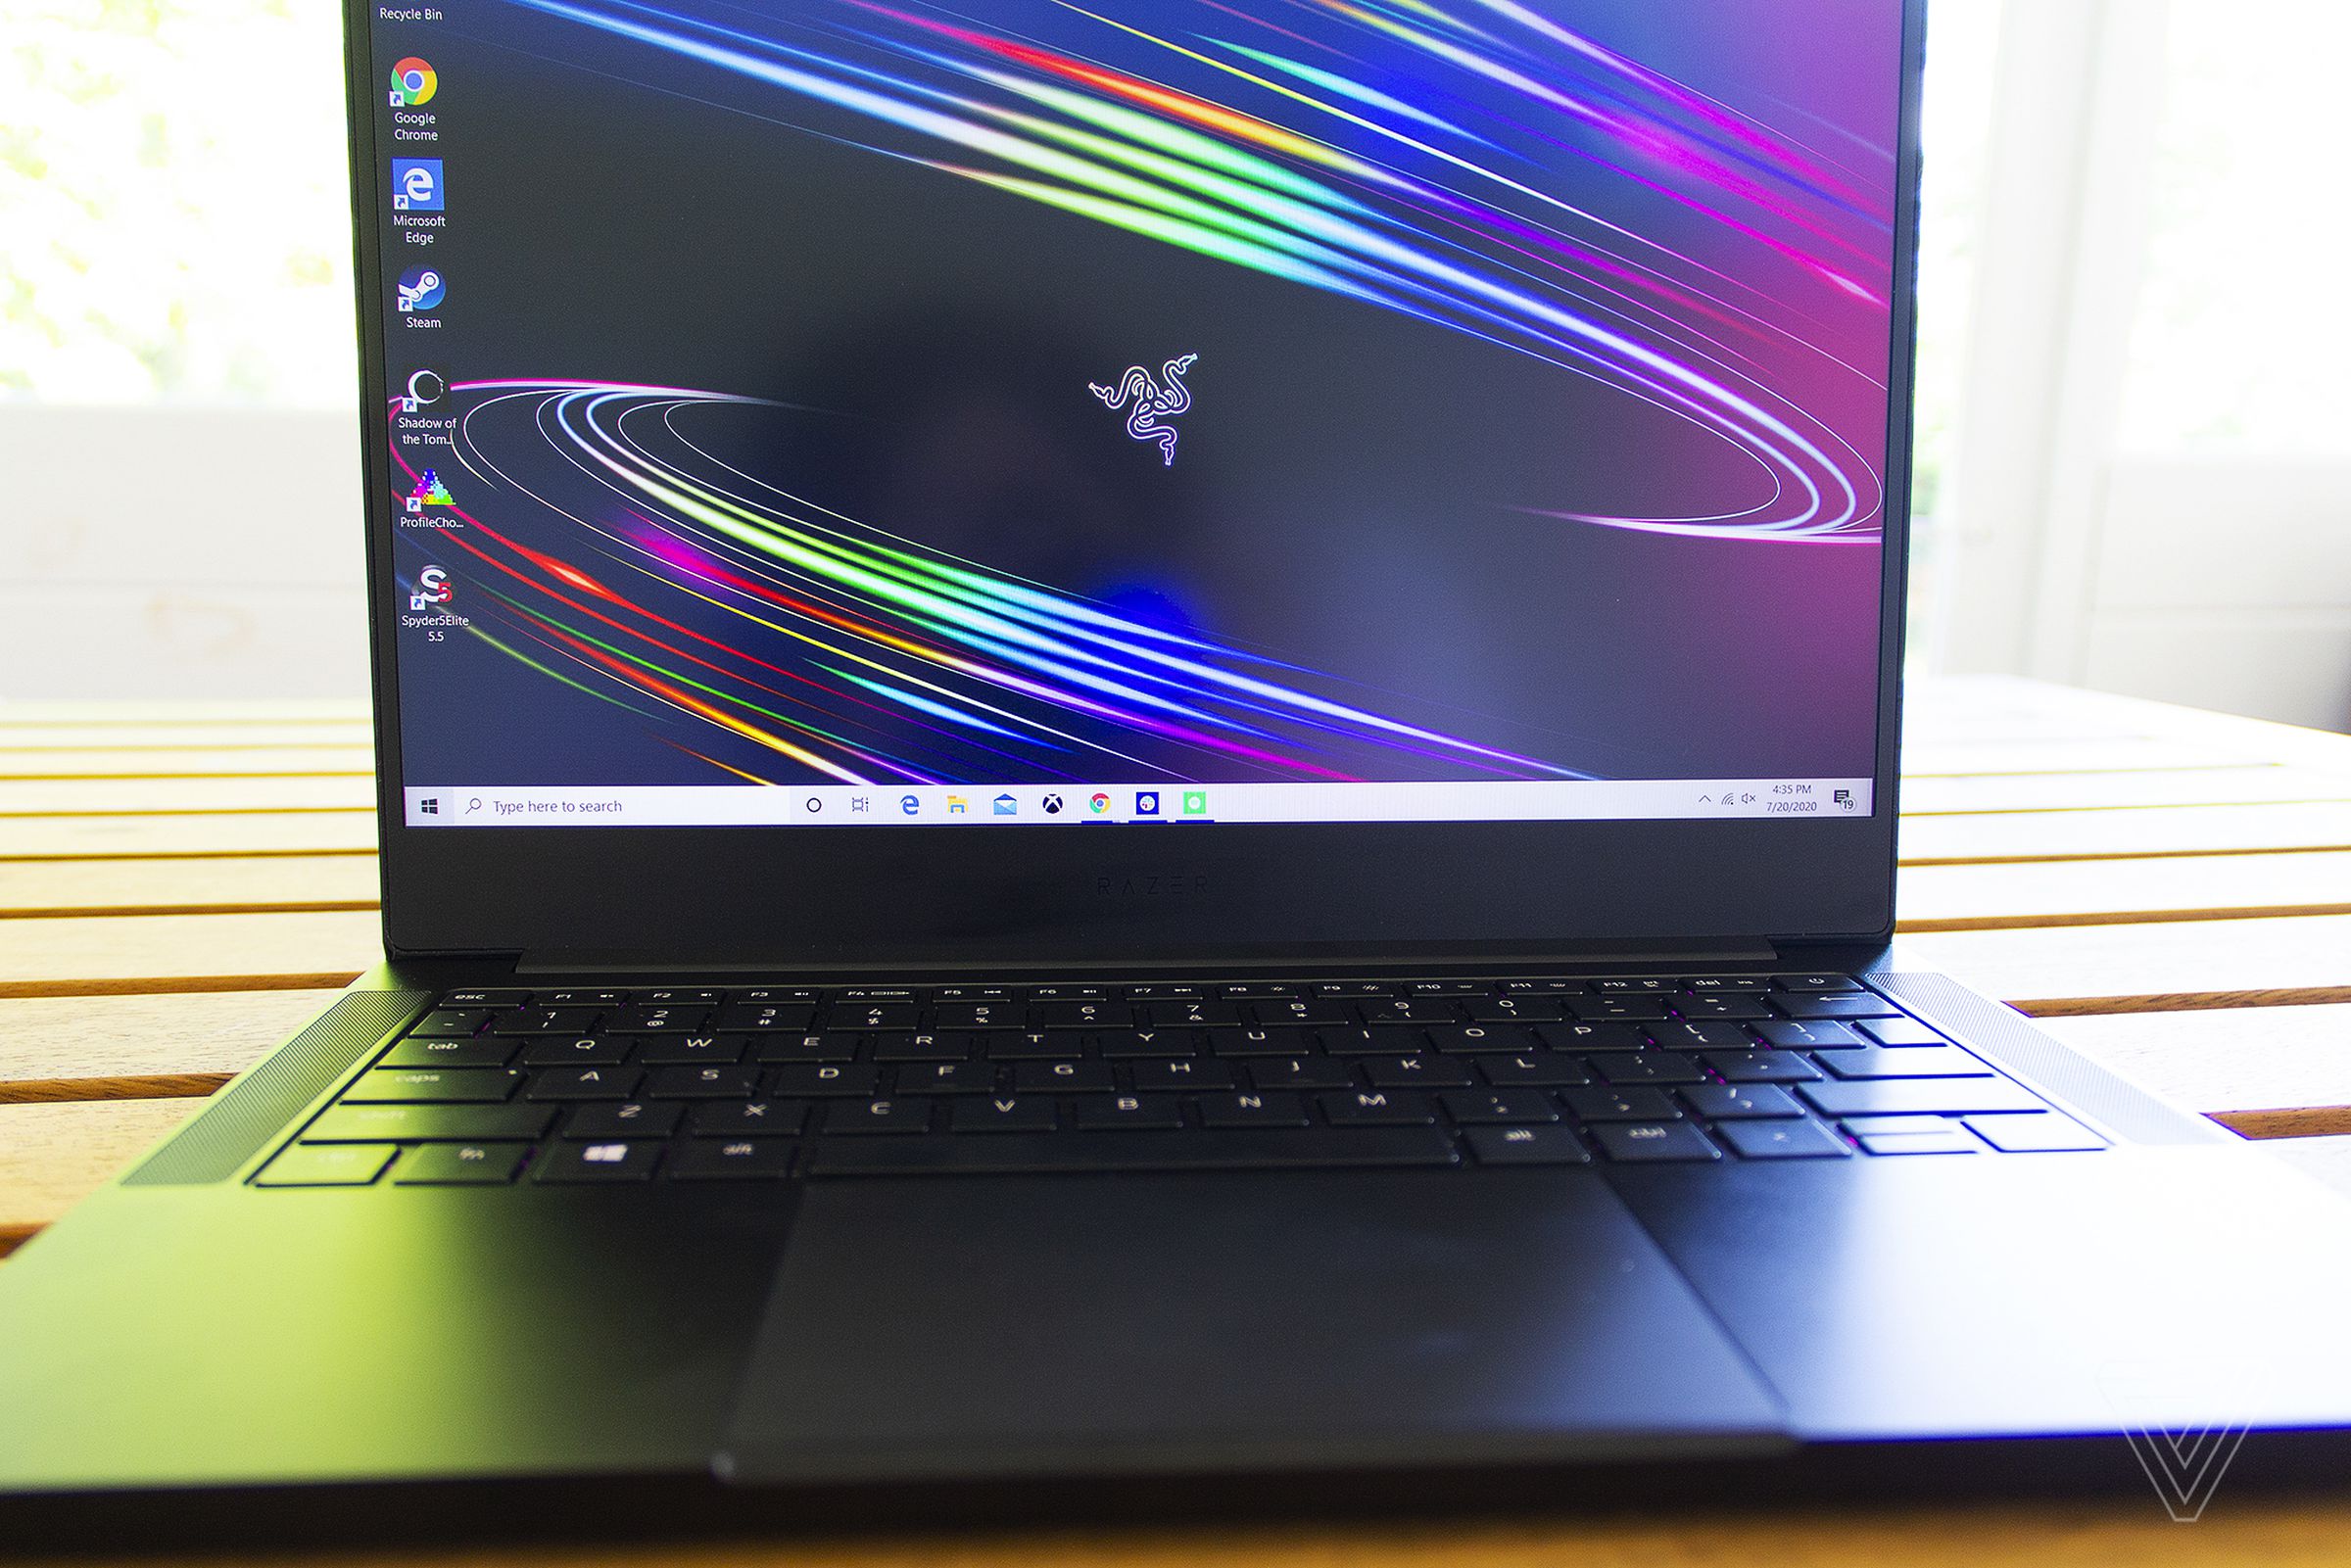 Close-up of the Razer Blade Stealth 13 with the Razer logo on the bottom bezel.